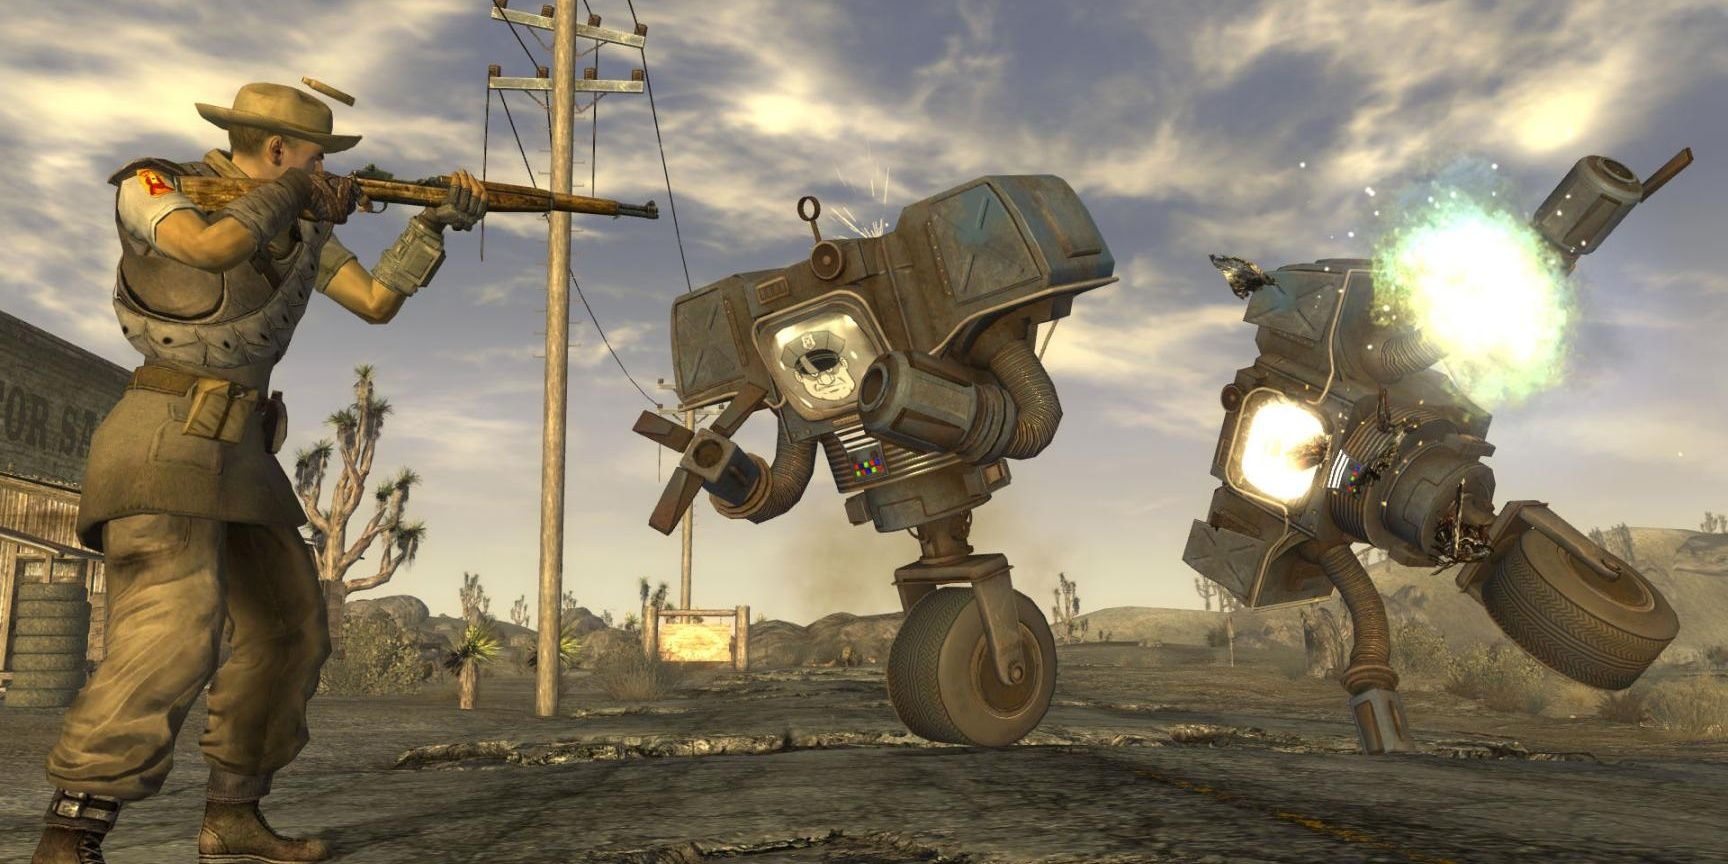 A player shoots at enemies in Fallout: New Vegas